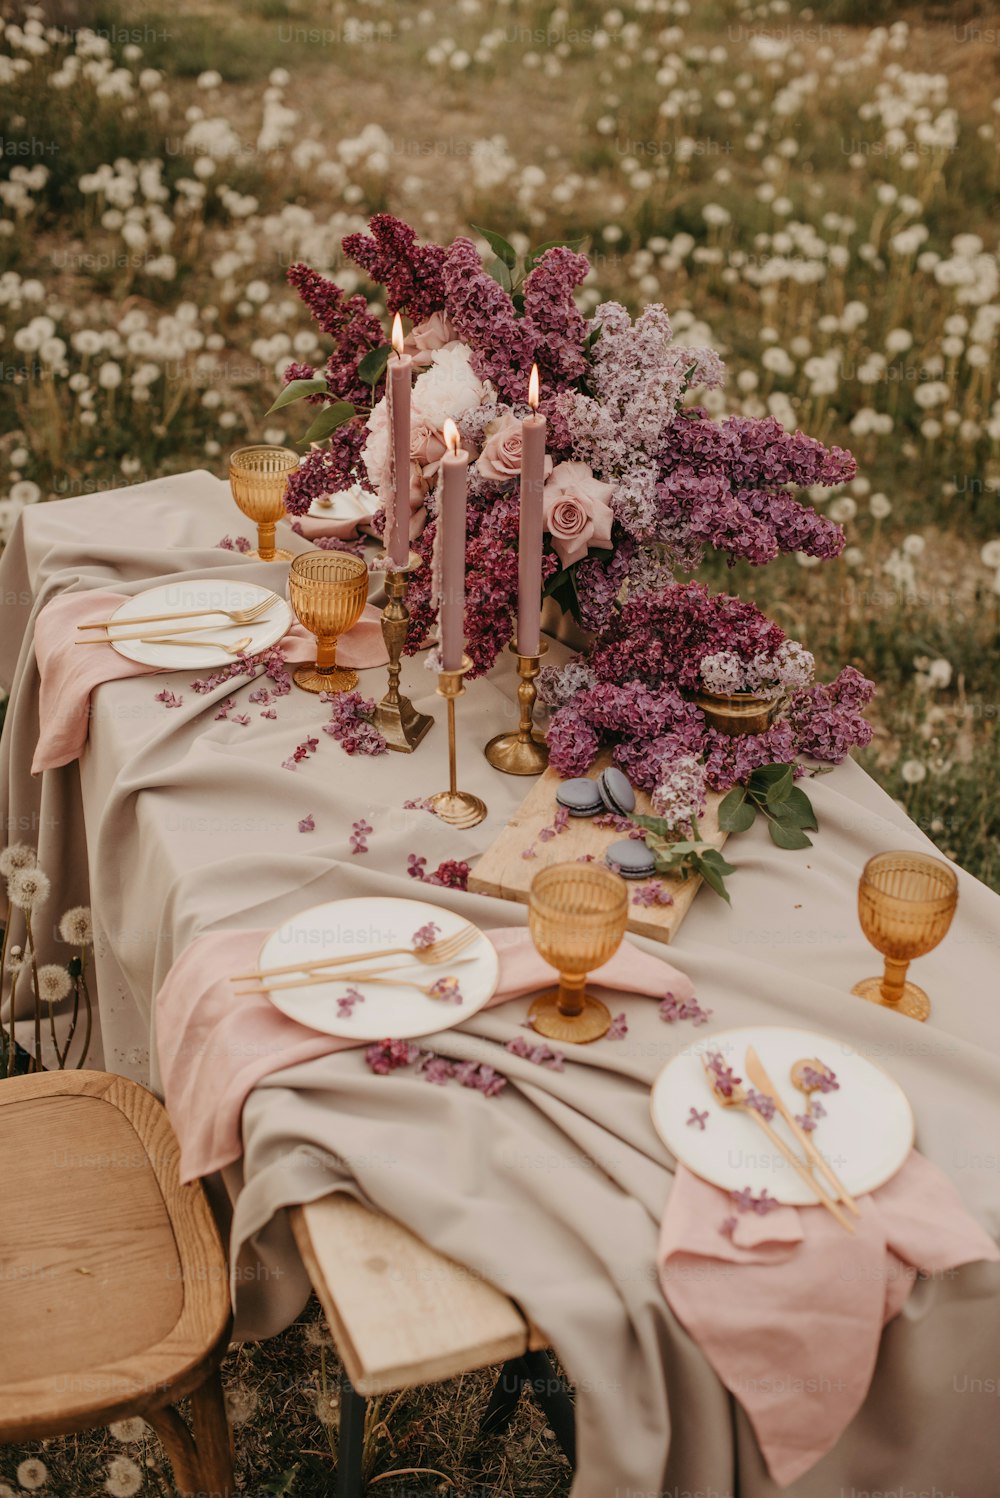 a table is set with plates, candles, and flowers